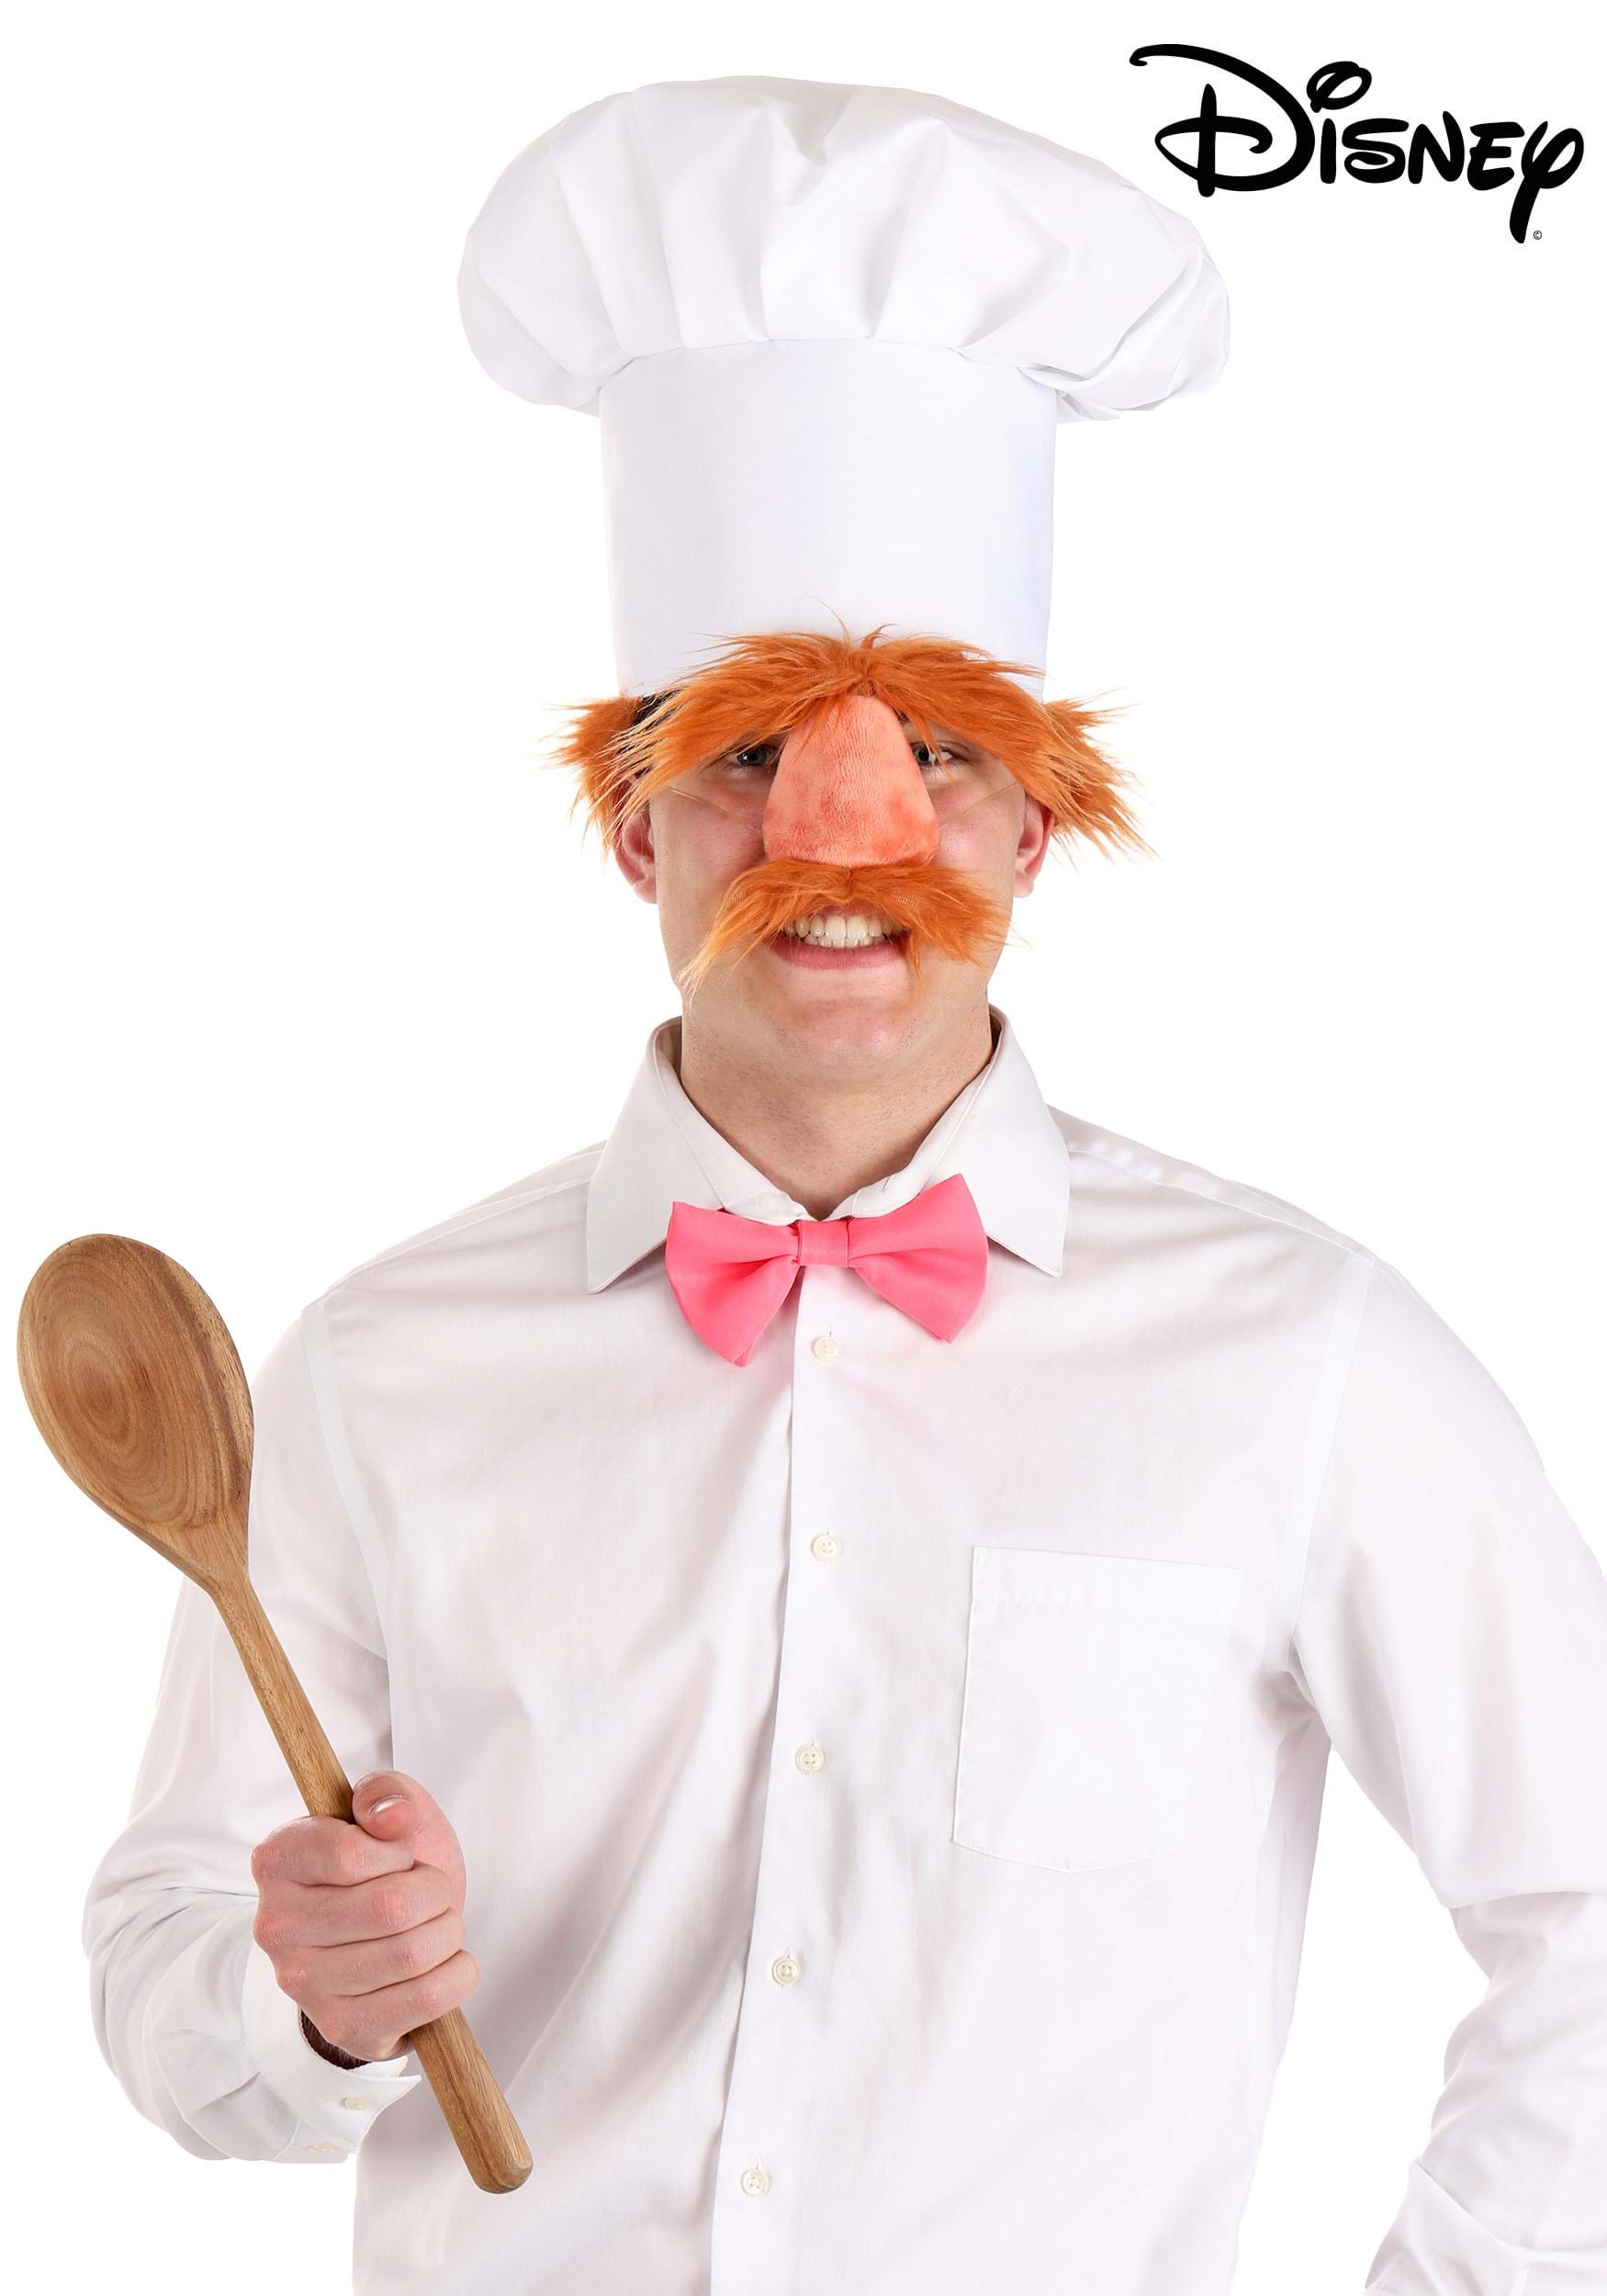 Disney Swedish Chef Hat, Nose & Bow Kit for Adults